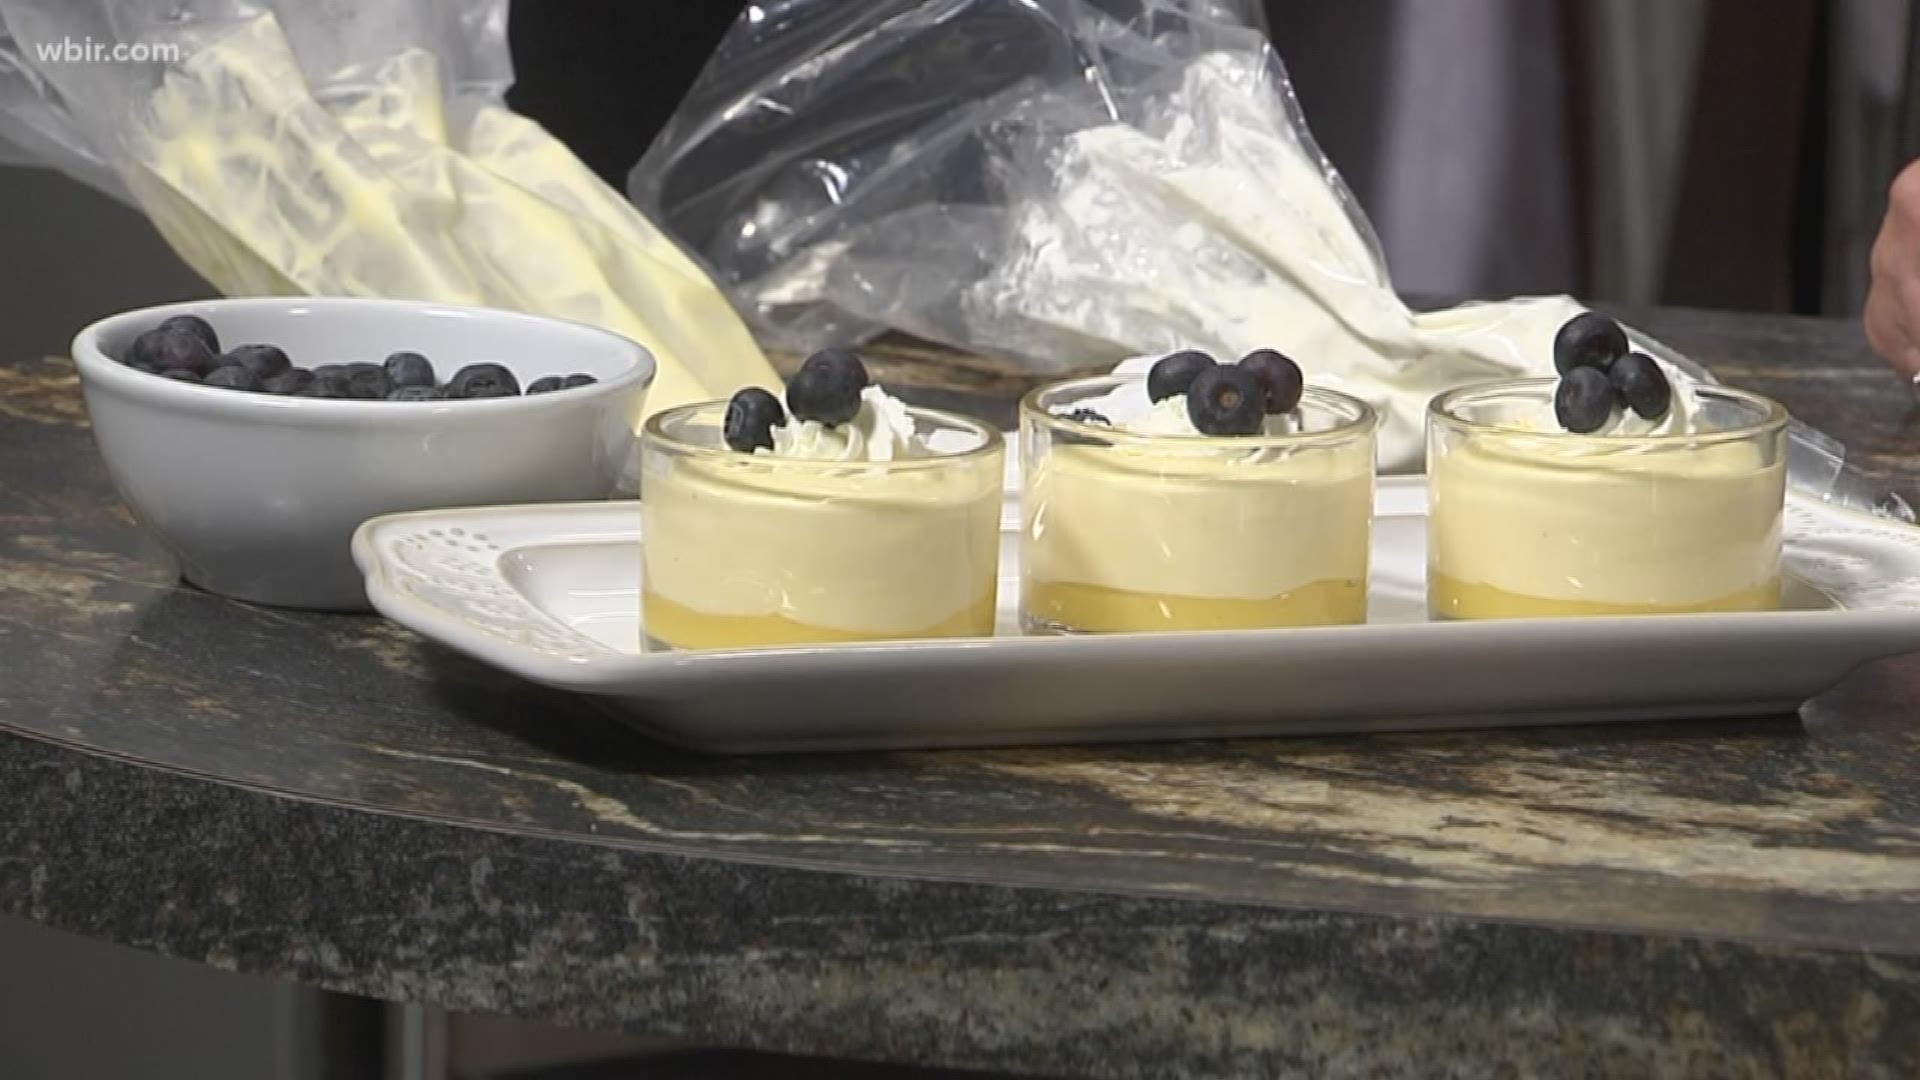 Betty Henry joins us in the kitchen with this tasty summertime treat. And it looks delicious!